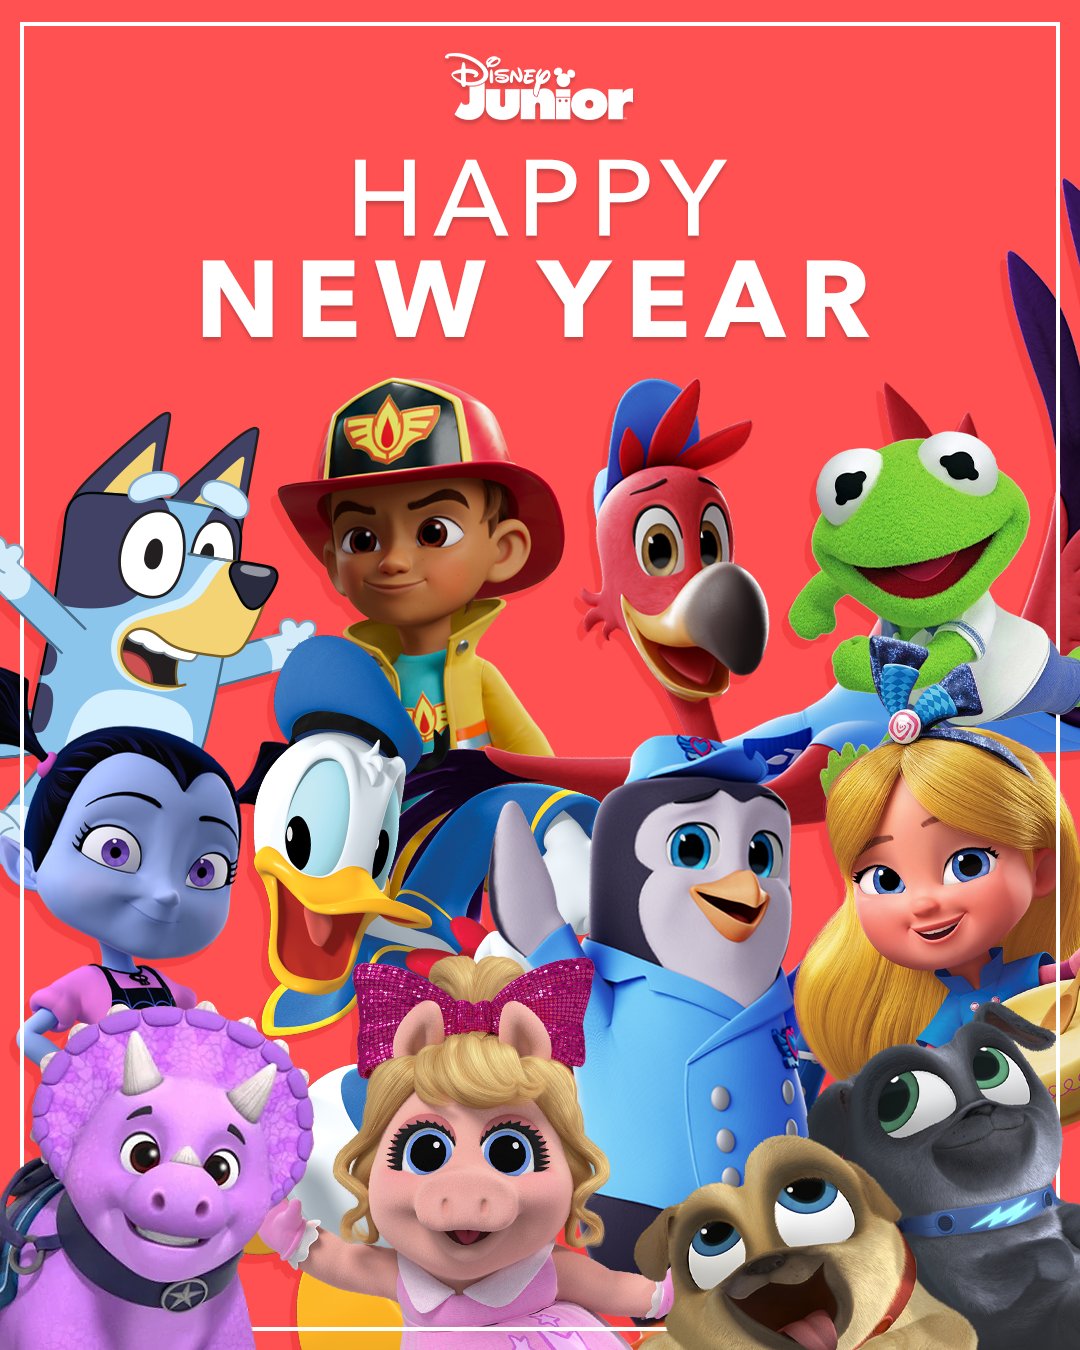 Disney Junior on X: Wishing you all a wonderful new year filled with fun  and adventure 🎊 From our #DisneyJunior family to yours.   / X